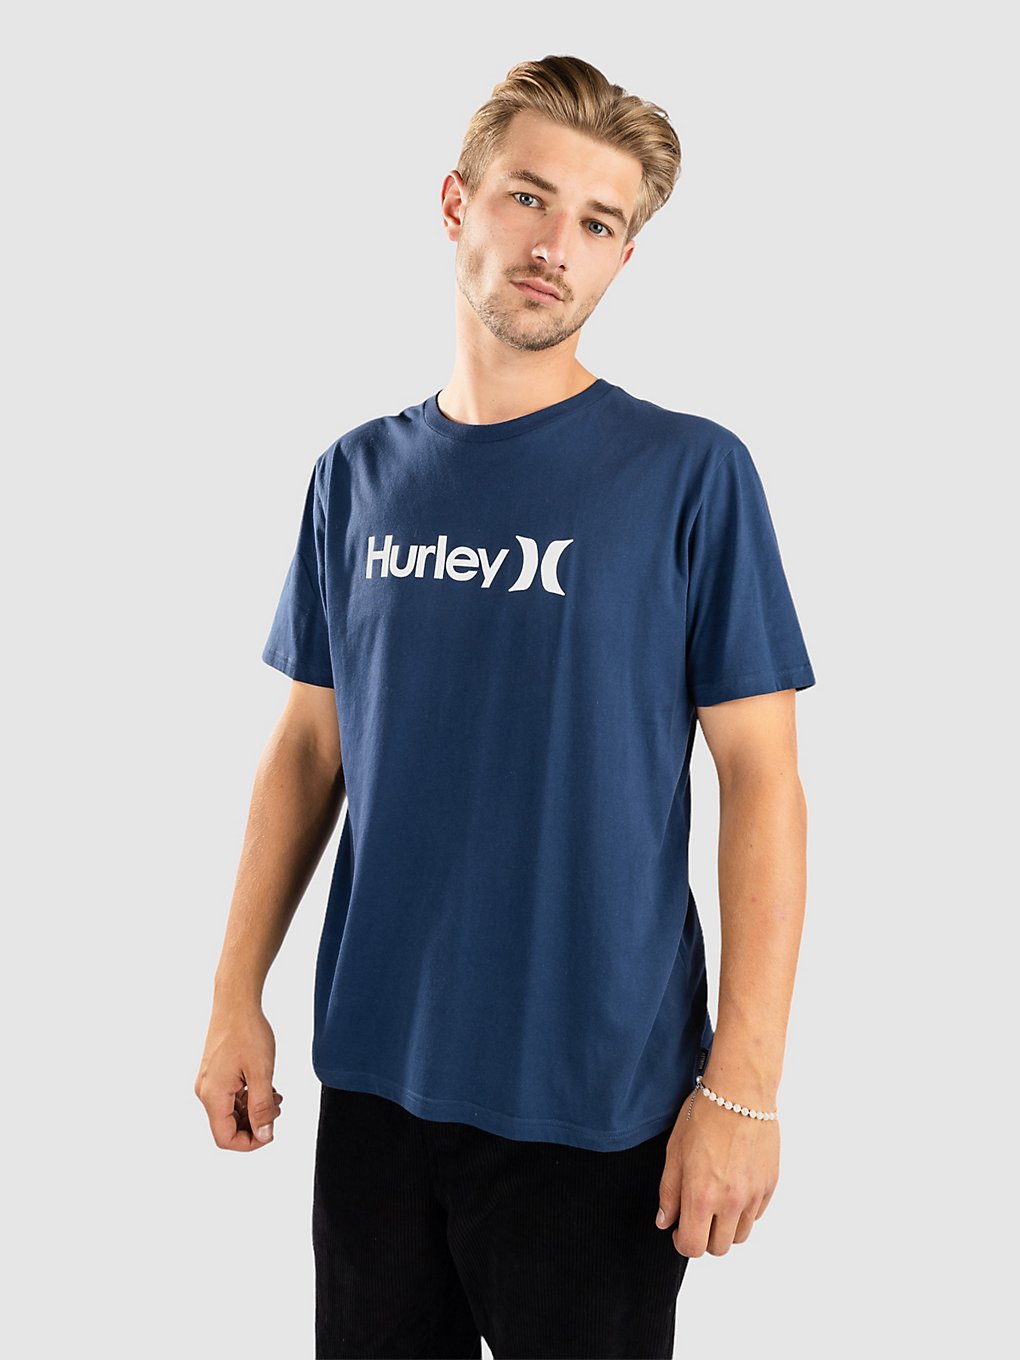 hurley one & only t-shirt insignia blue